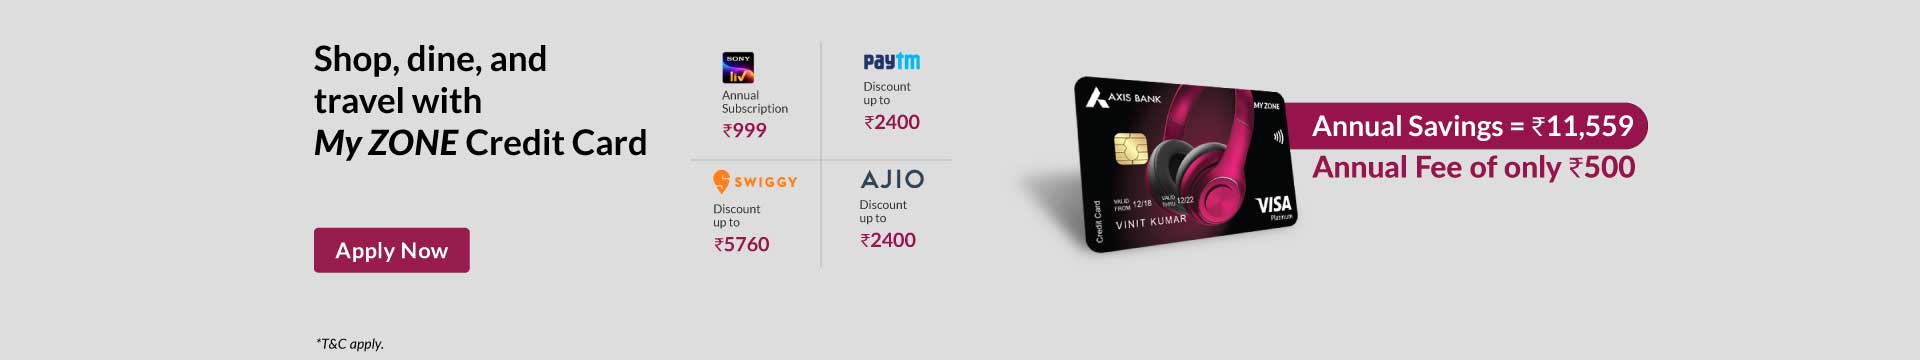 Apply for Axis Bank MyZone Credit Card